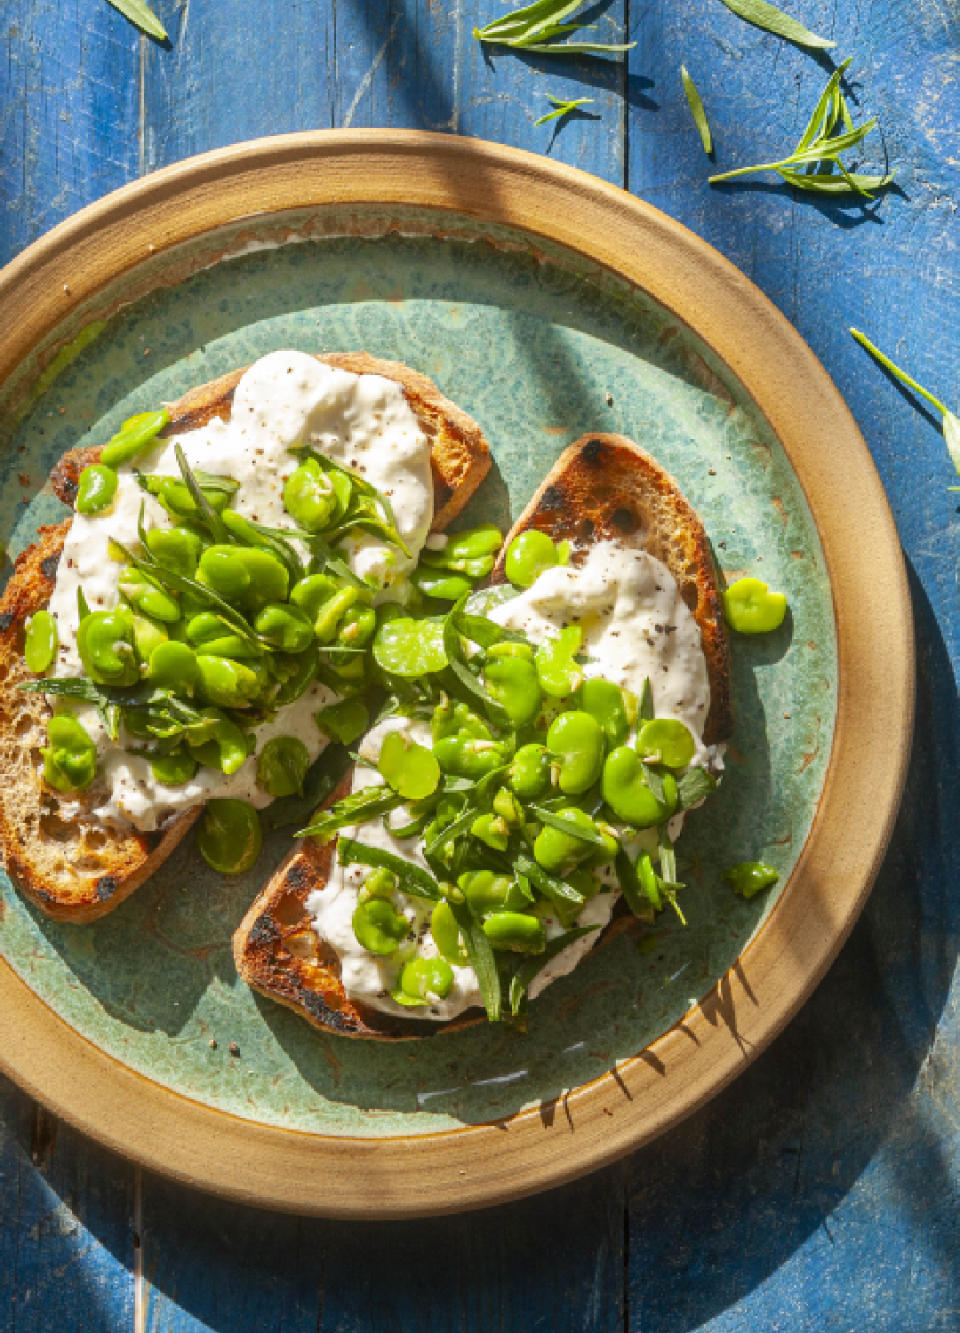 Ricotta and broad beans on toast